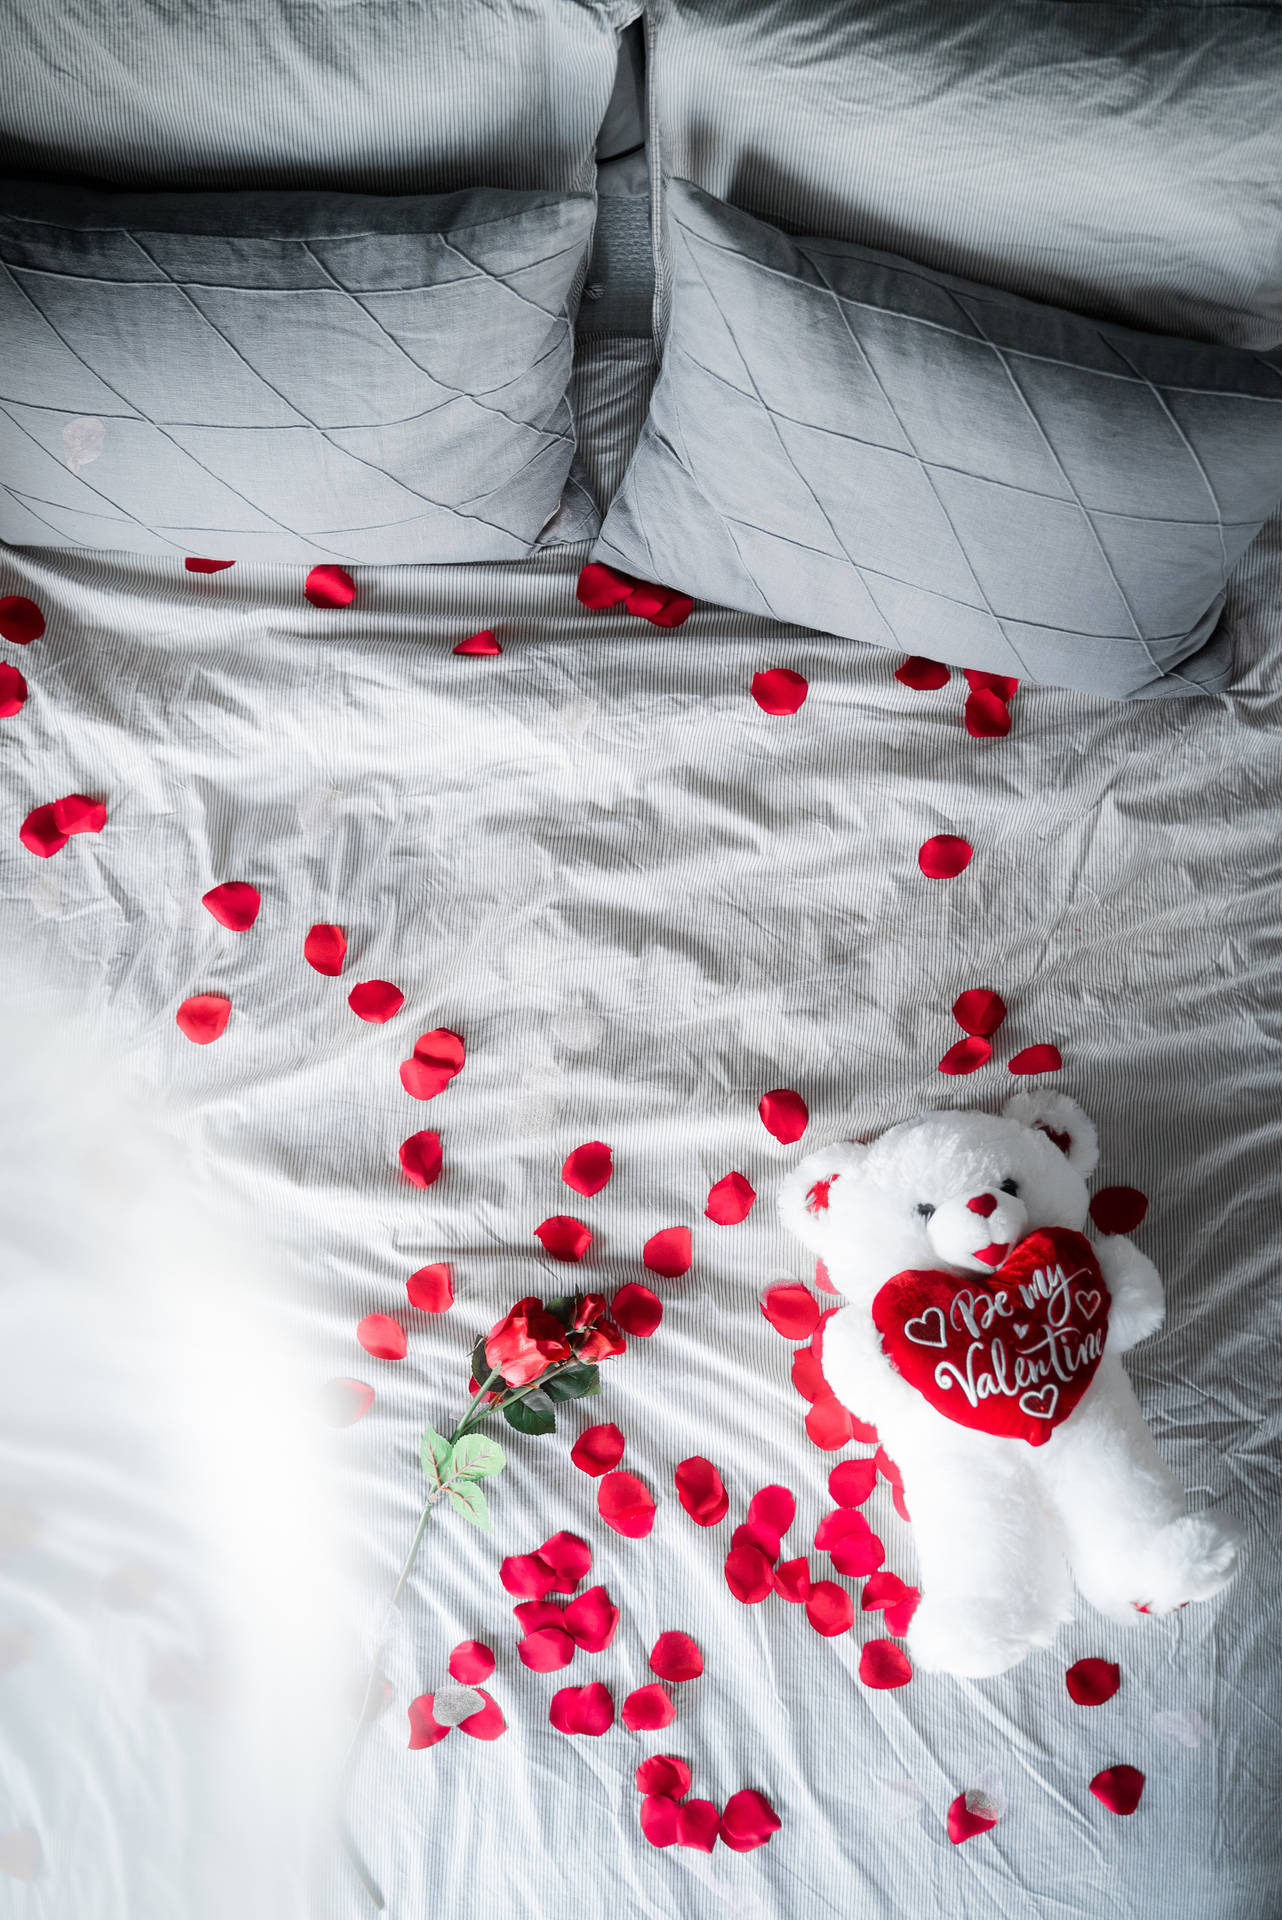 Valentines Bed Of Roses Background